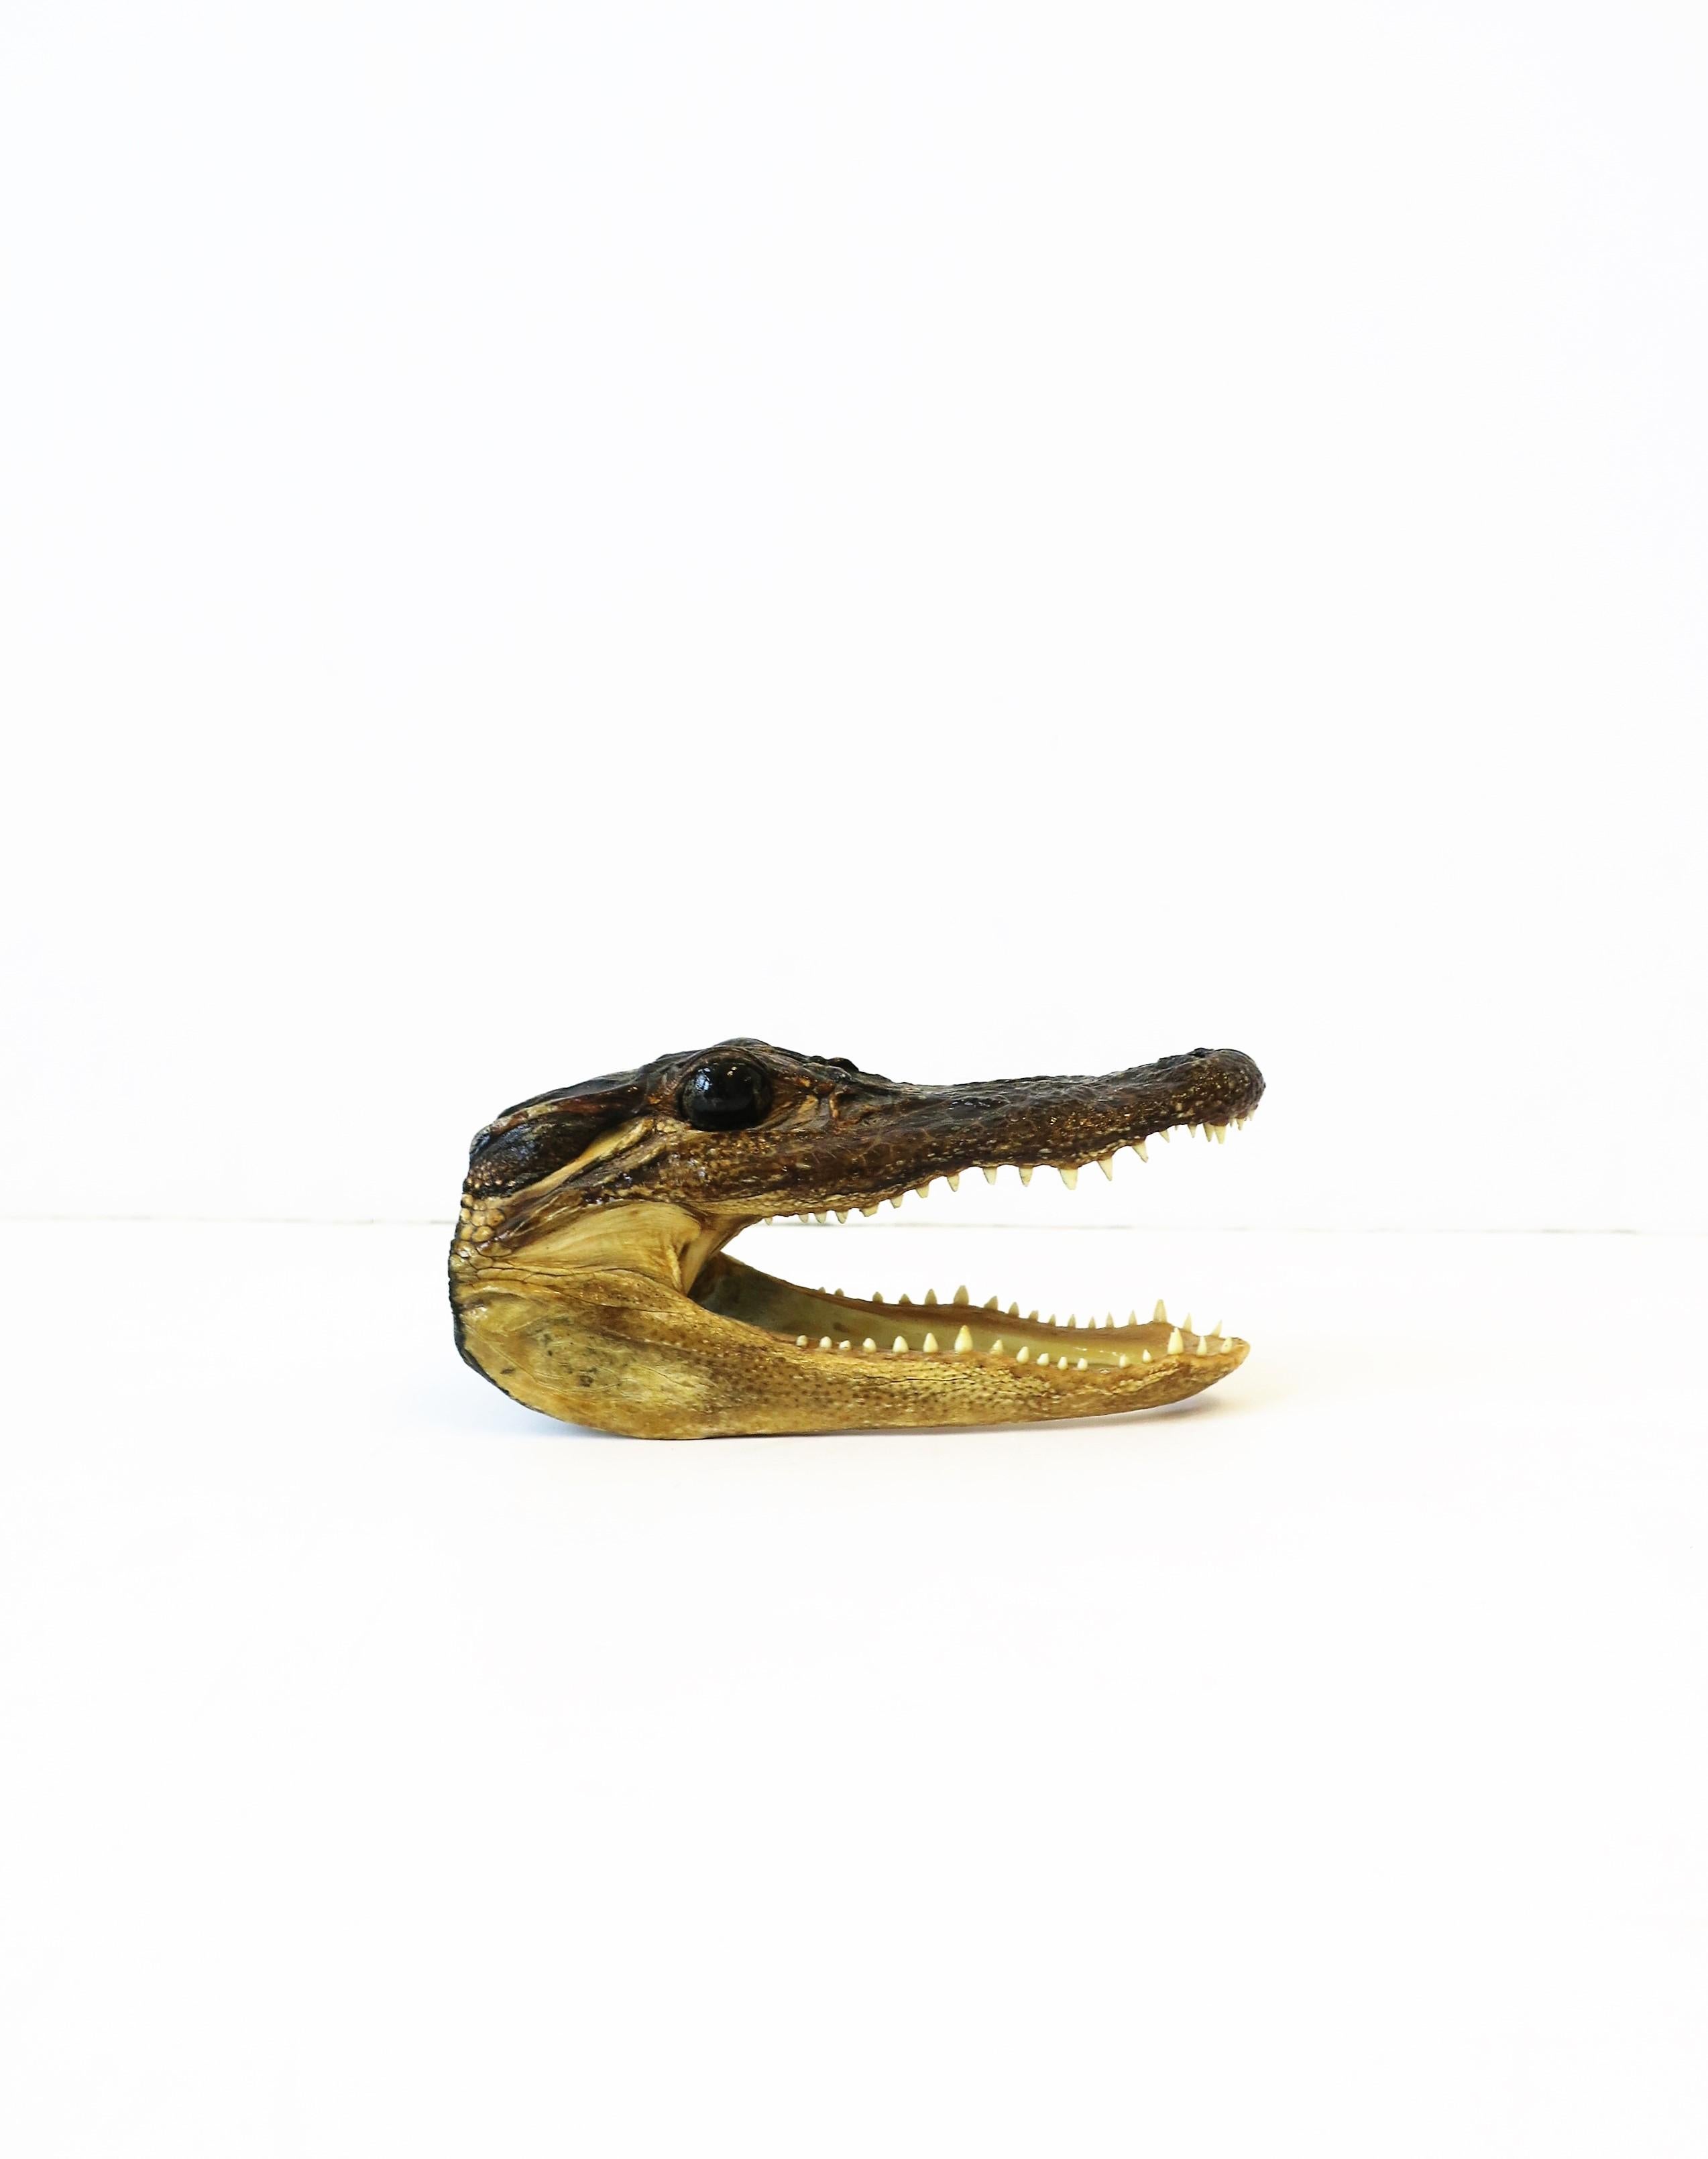 A real Alligator reptile taxidermy head decorative object or sculpture piece, circa 20th century or earlier. 
Dimensions: 2.13